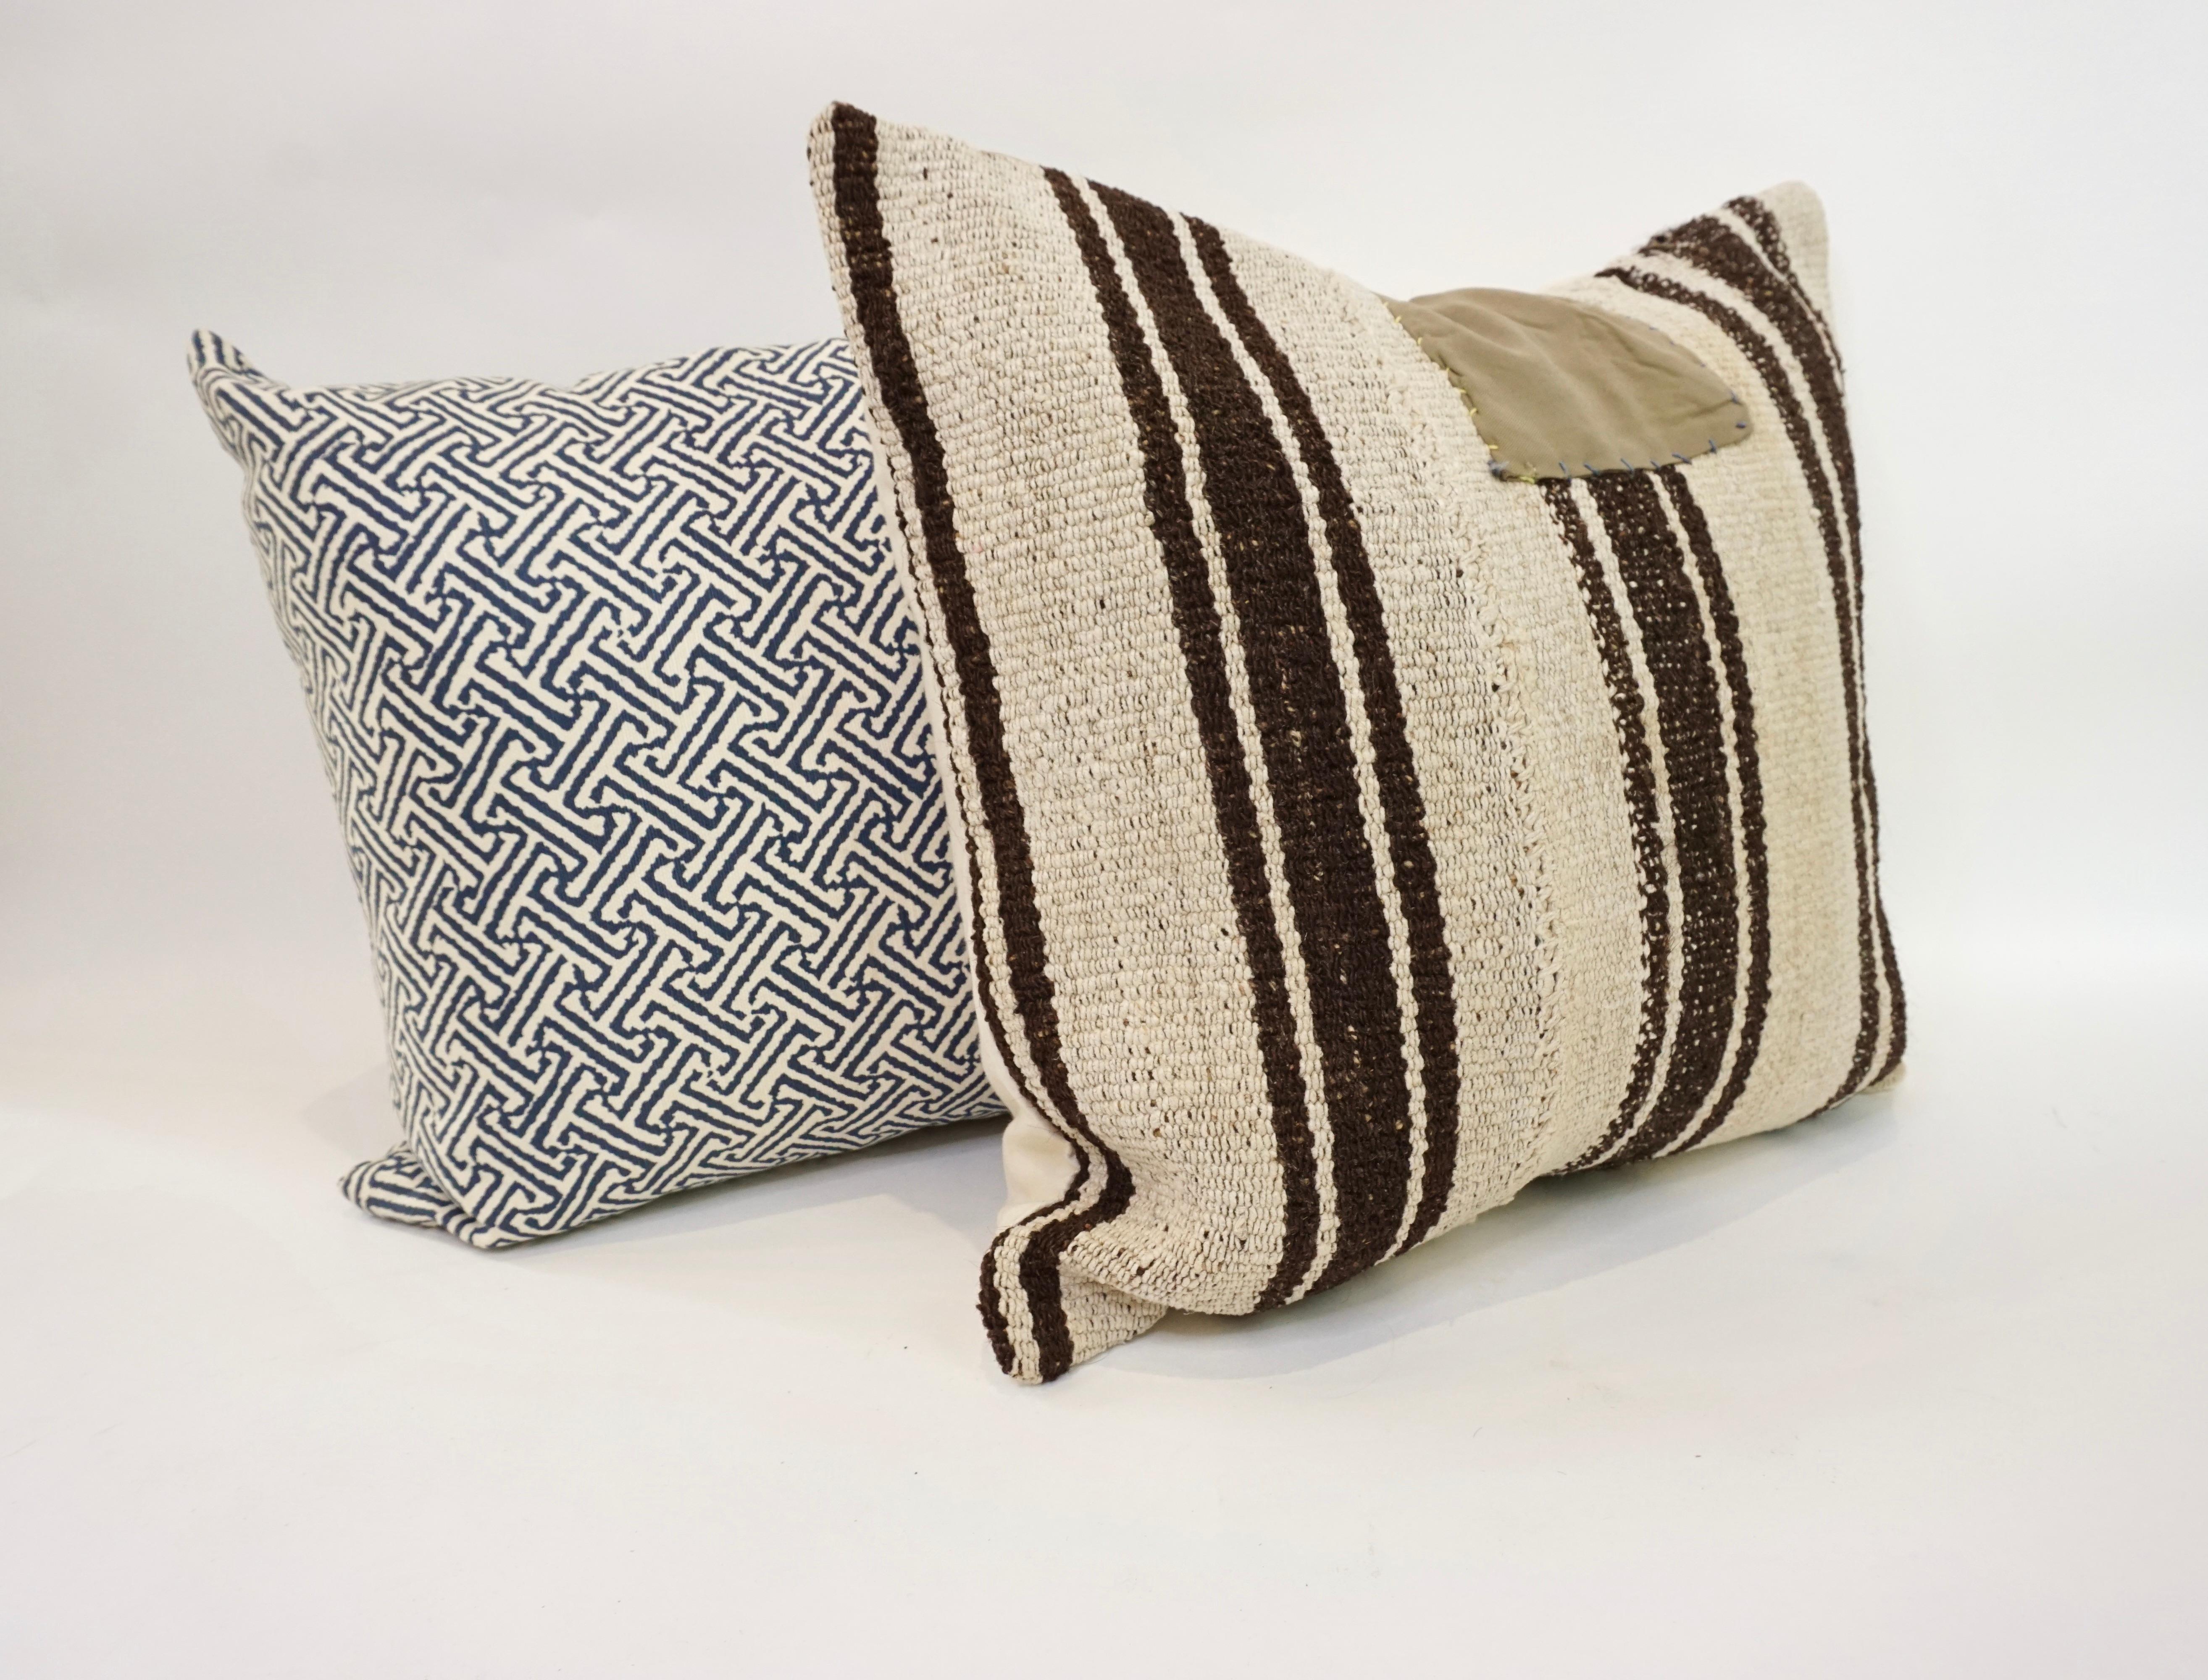 A beautiful and plush accent for your home, this pillow is covered in an antique textile and has a cozy down insert. Measure: 18 x 18.